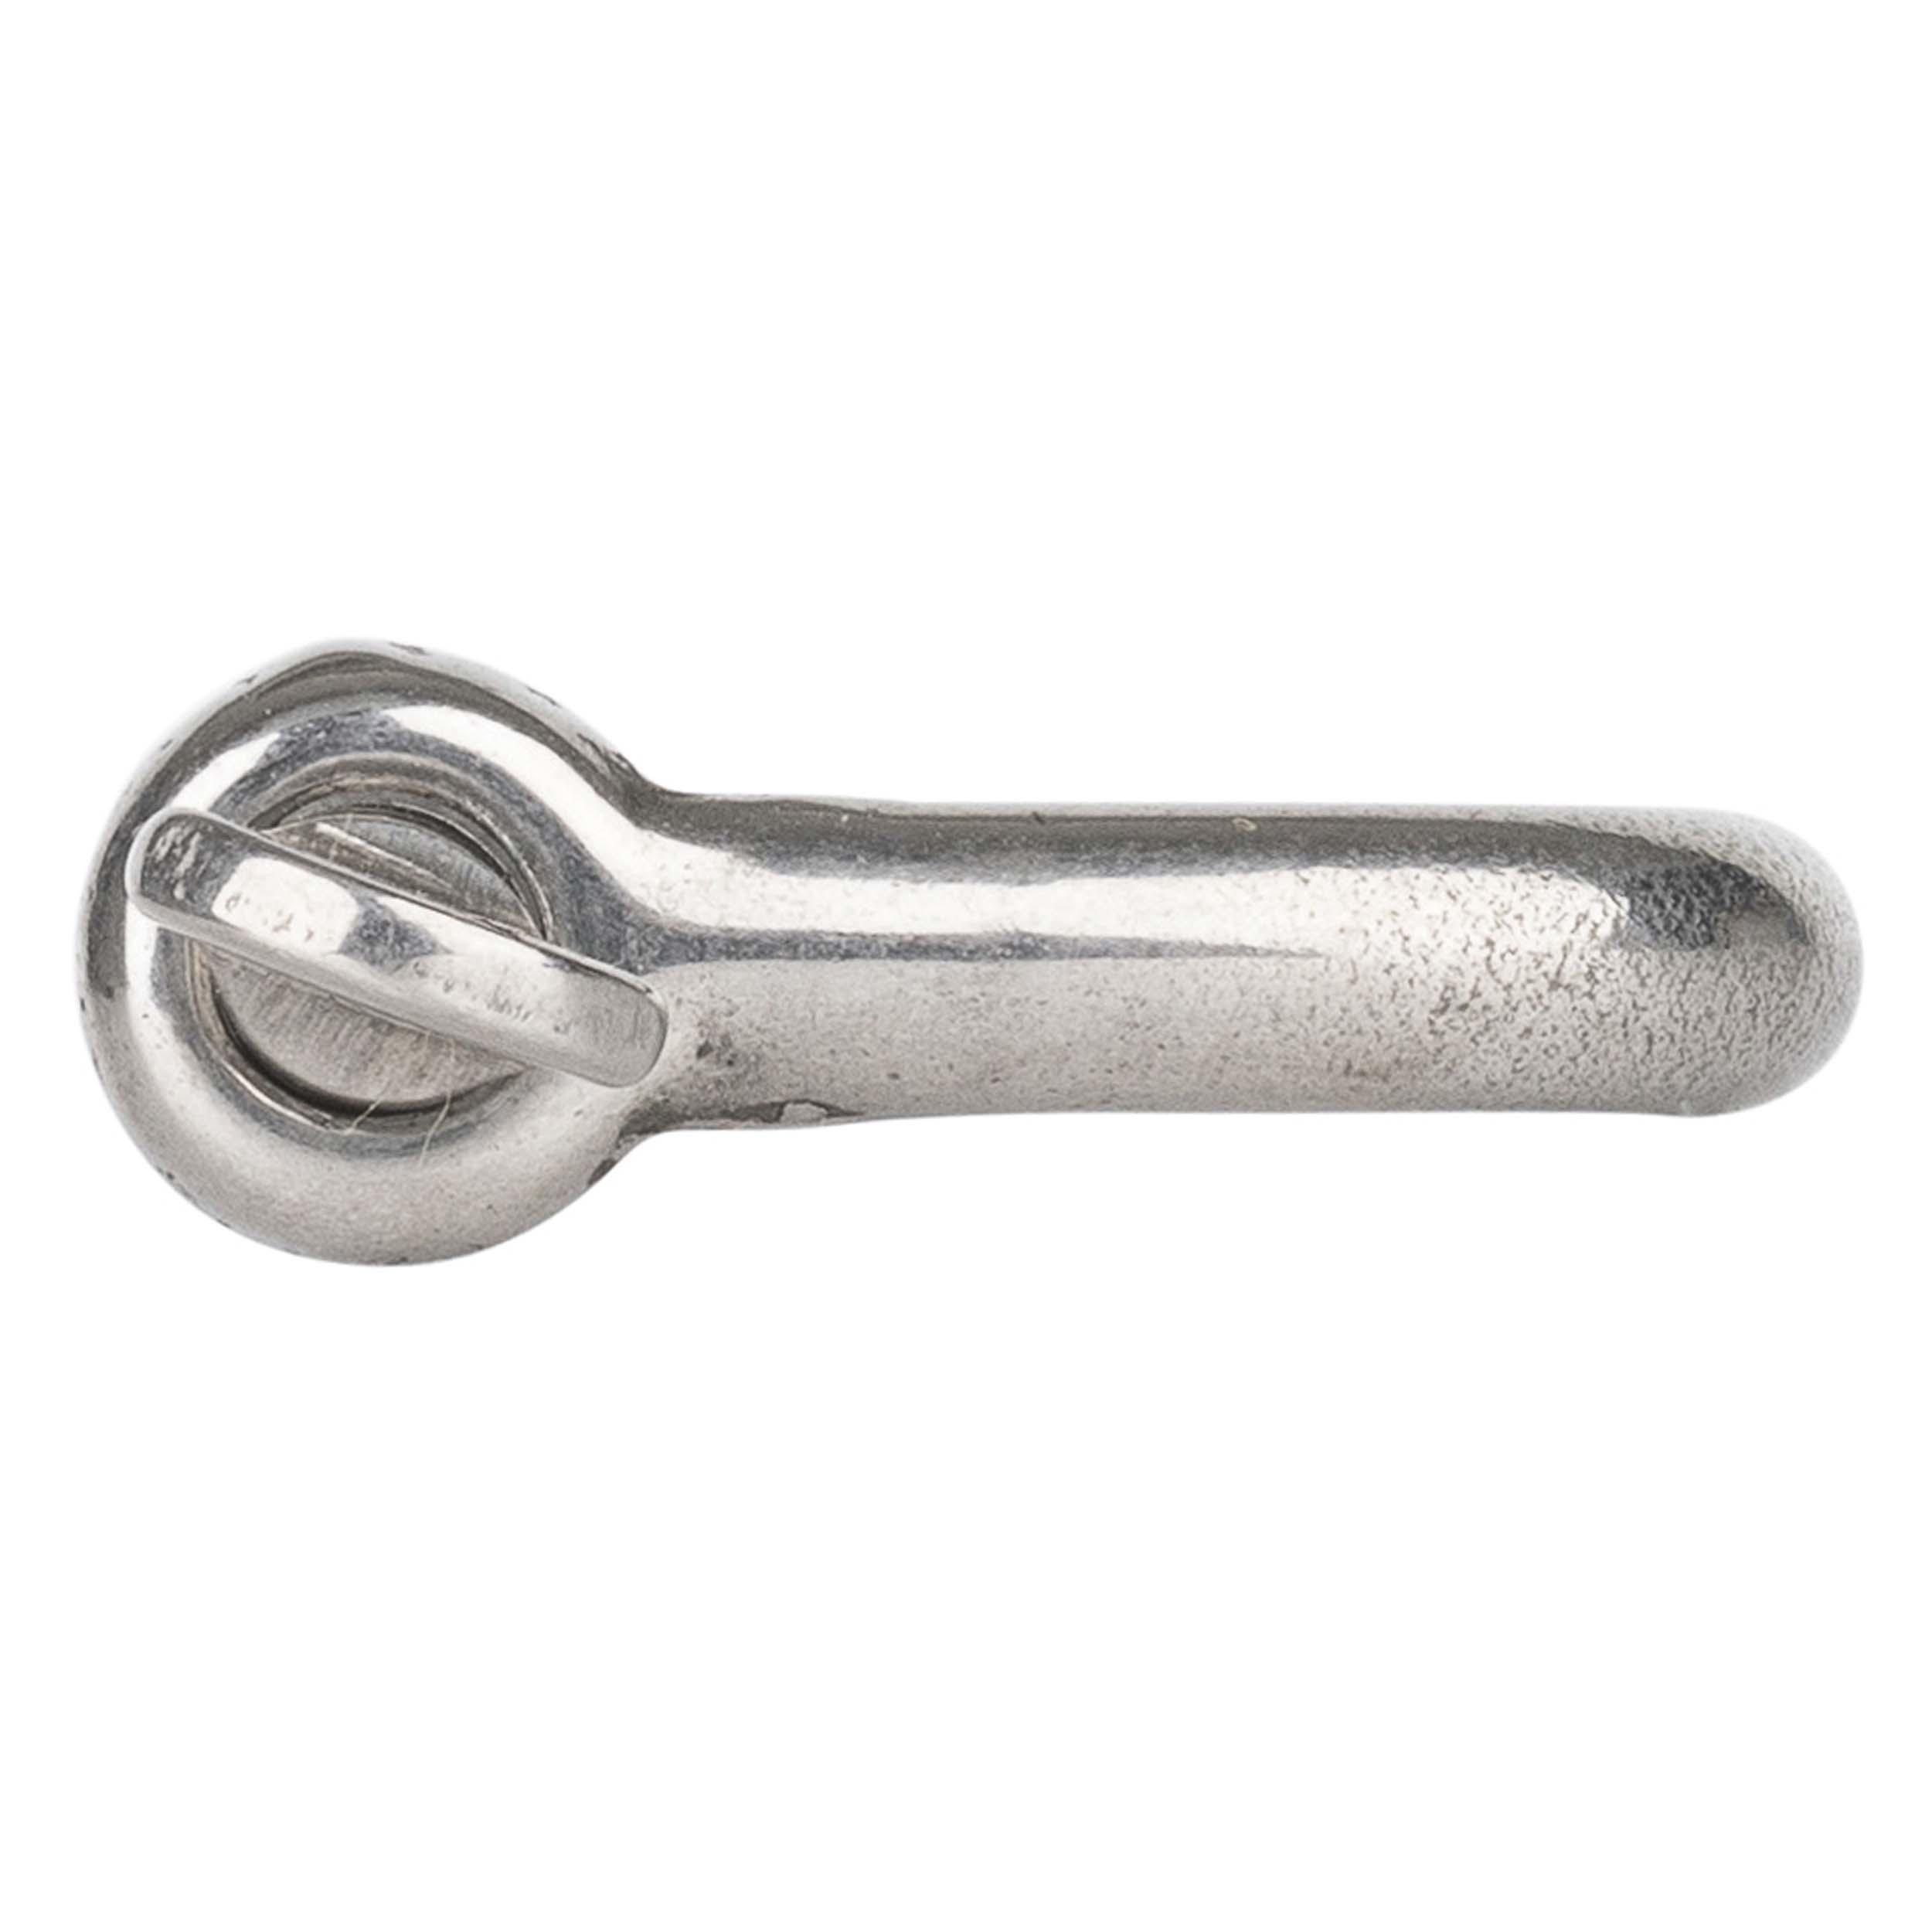 6 mm stainless steel straight captive pin sailing shackle 3/4